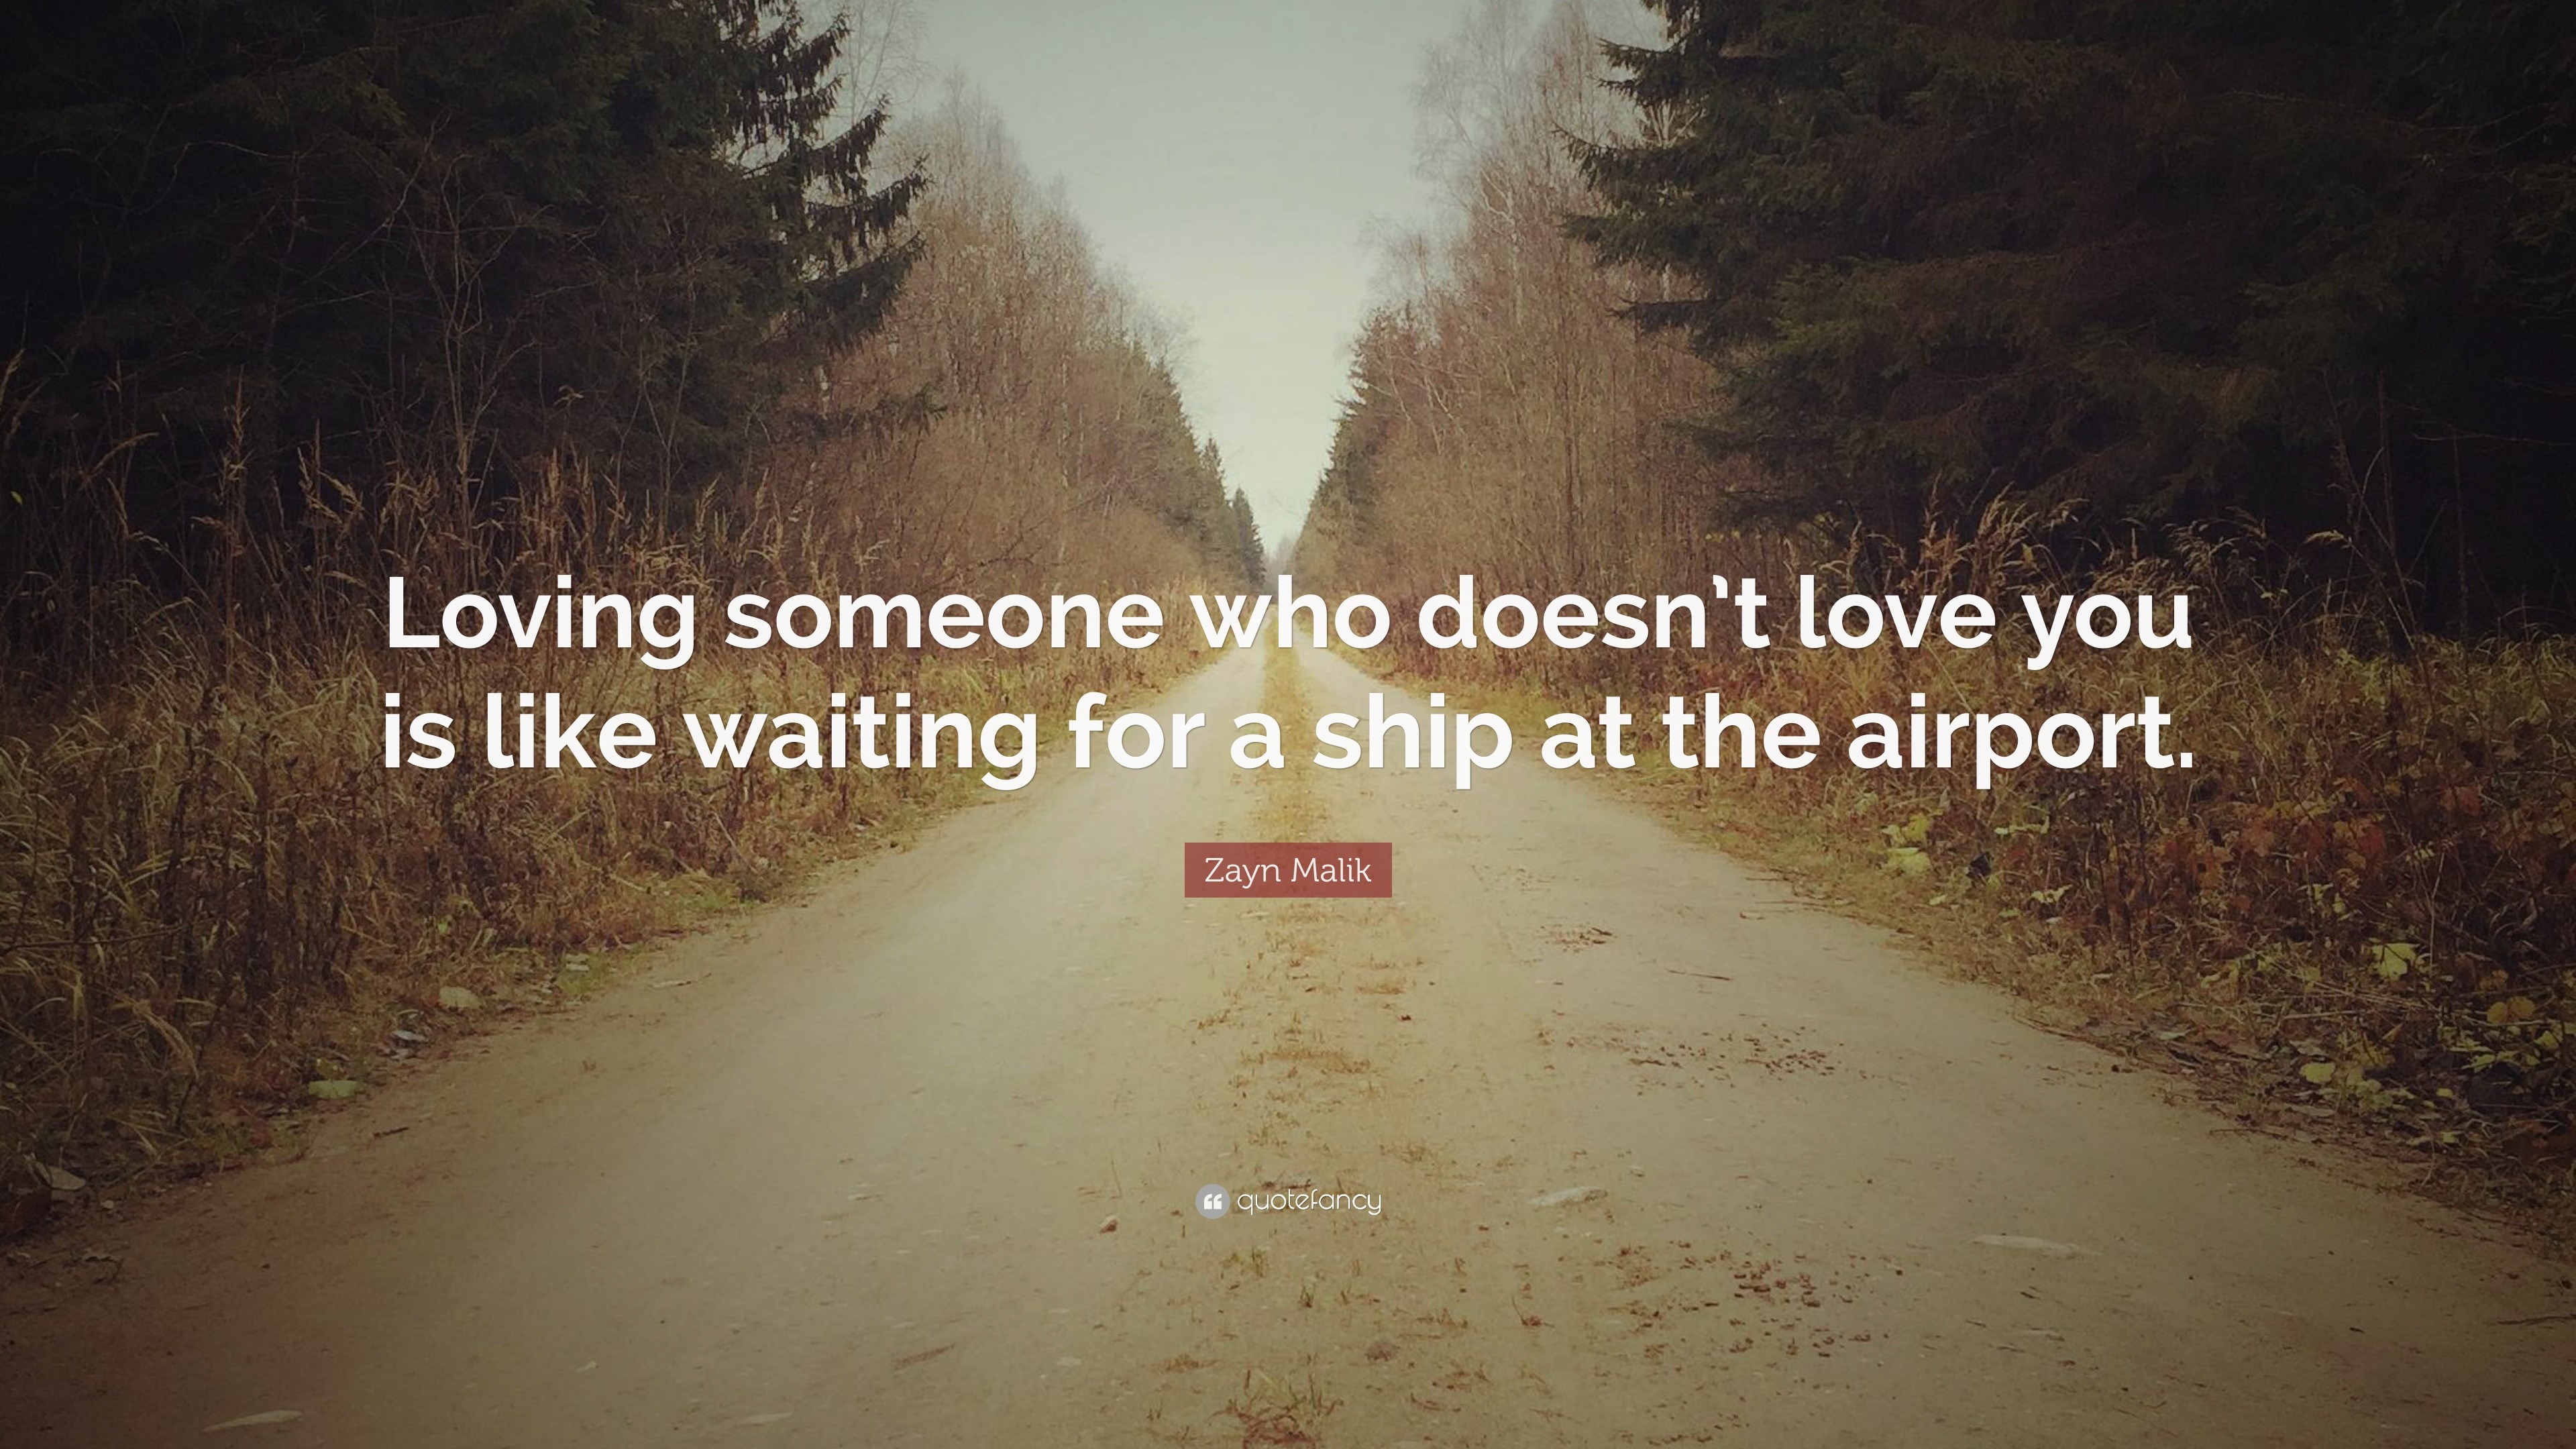 Zayn Malik Quote: “Loving Someone Who Doesn't Love You Is Like Waiting For A Ship